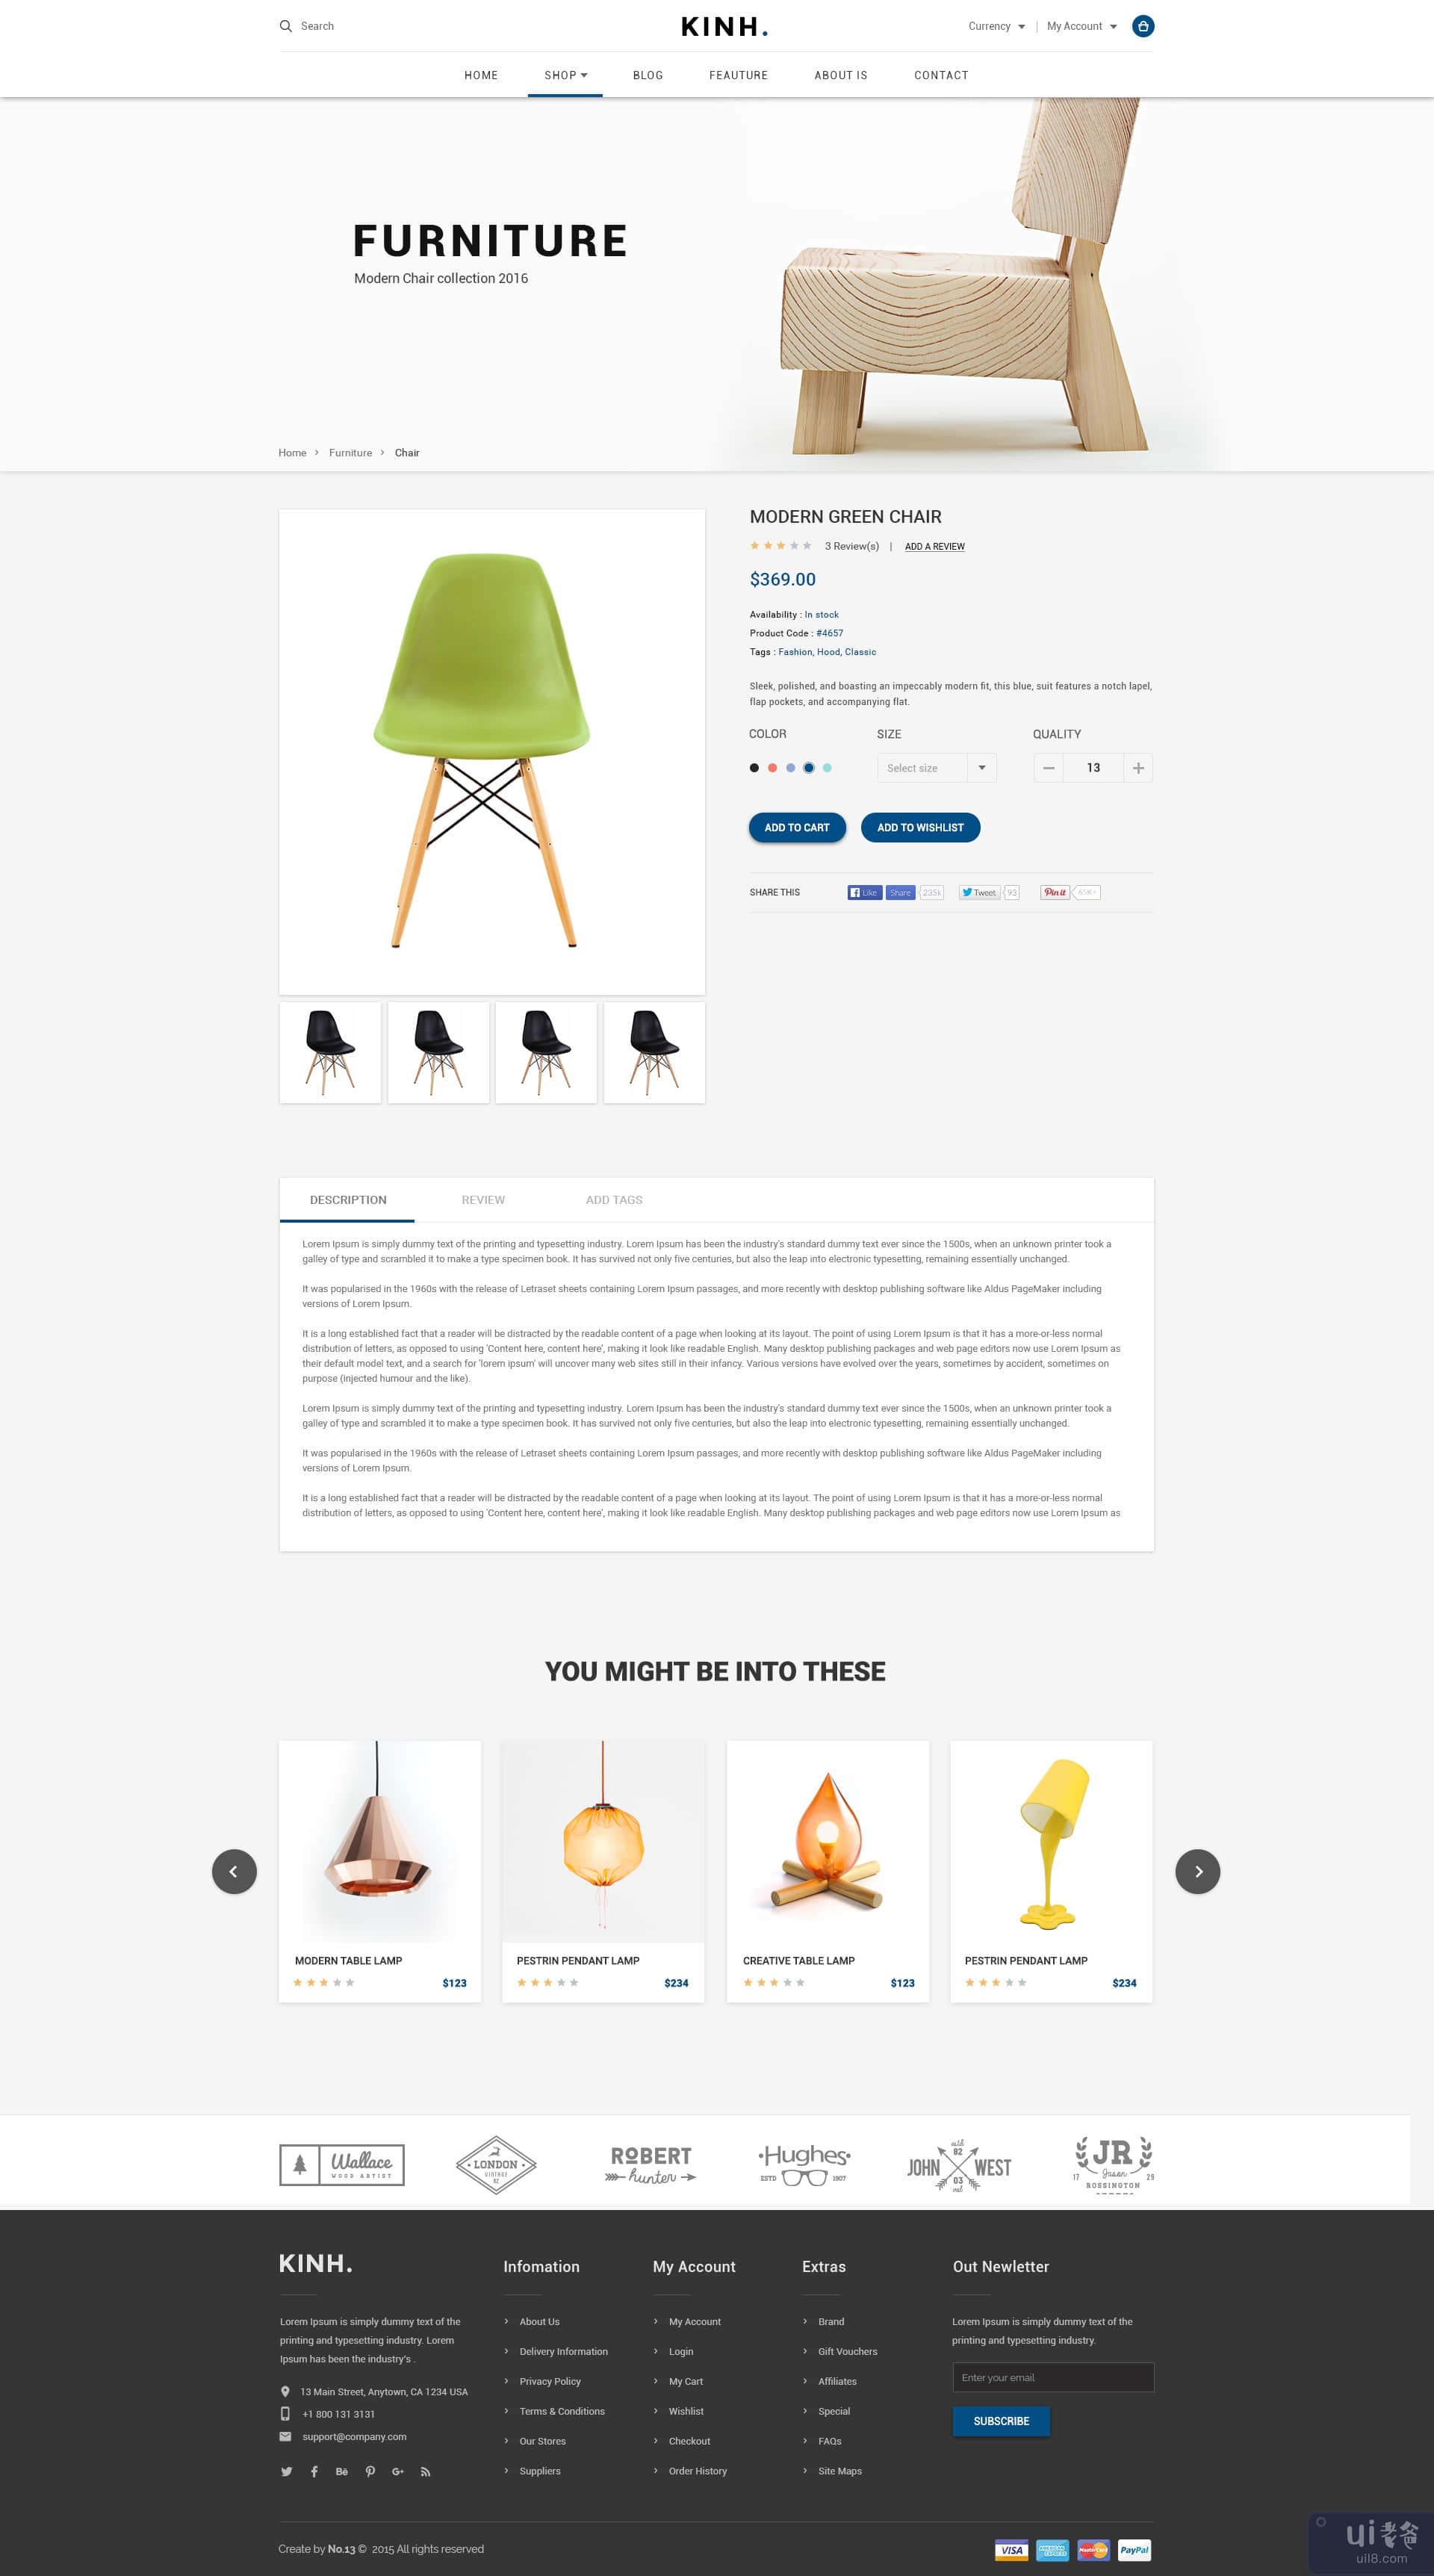 Kinh - 材料电子商务 PSD 模板(Kinh - Material E-Commerce PSD Template)插图5